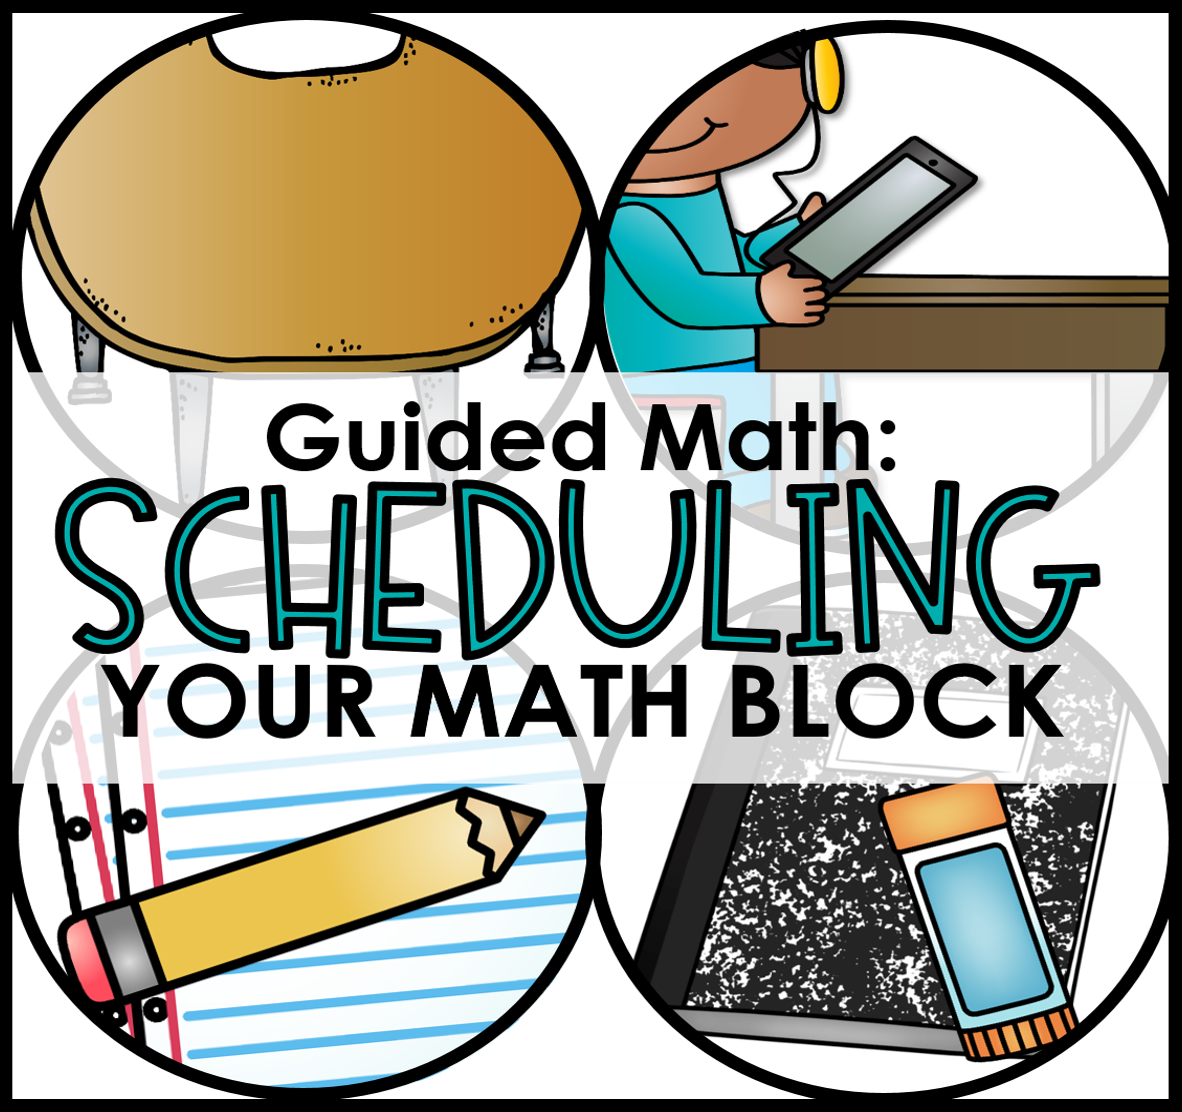 Scheduling Your Guided Math Block